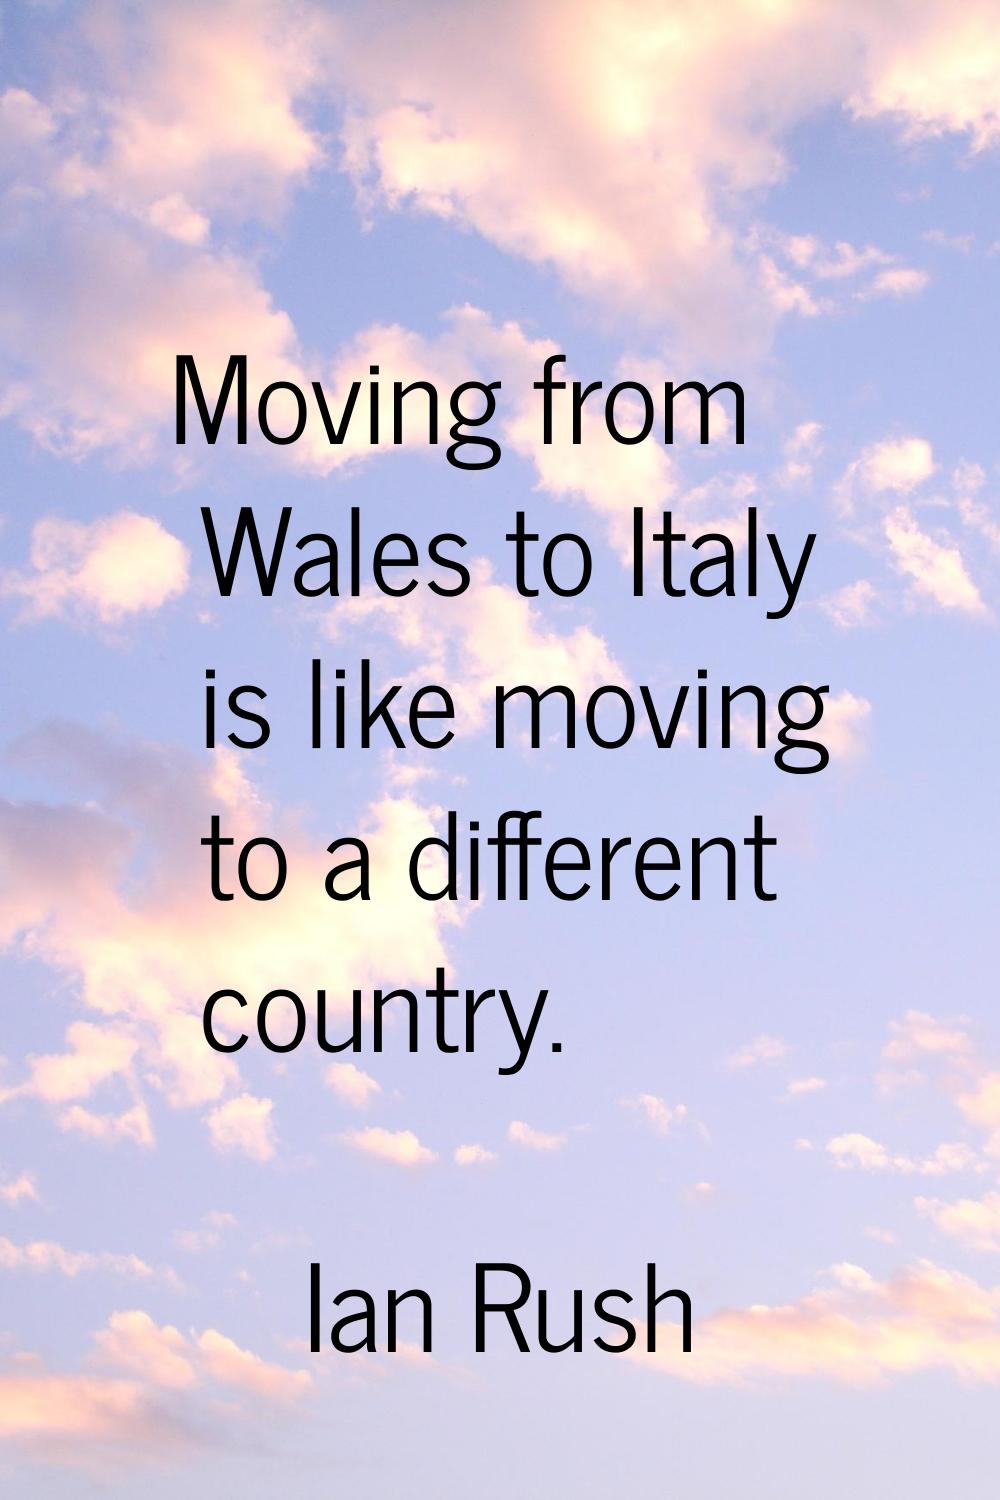 Moving from Wales to Italy is like moving to a different country.